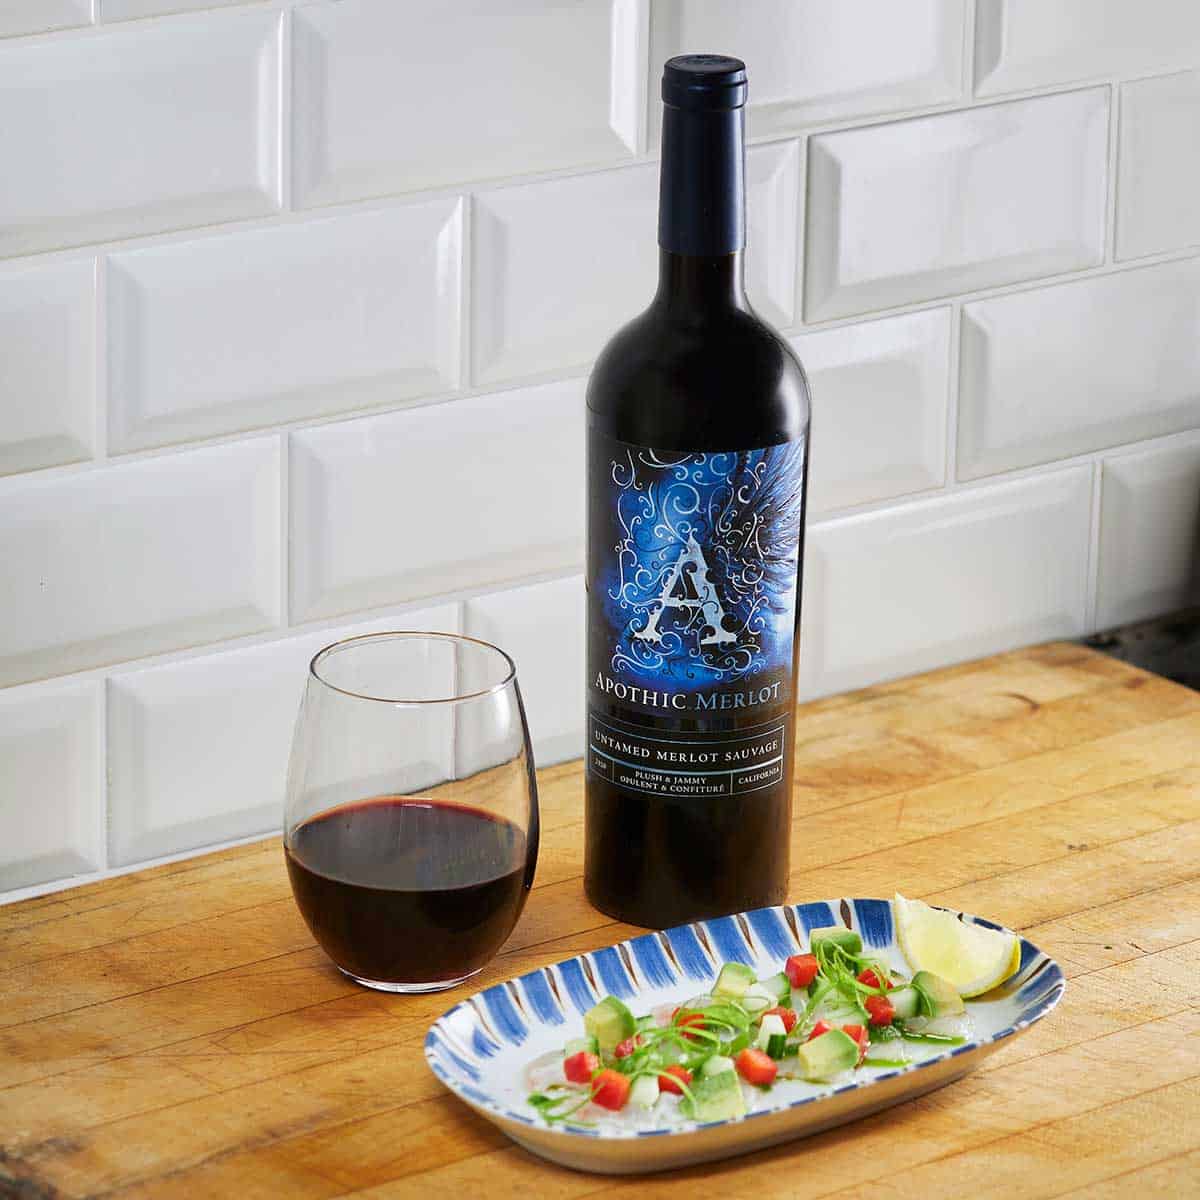 A crudities plate in front of a glass and a bottle of Apothic merlot